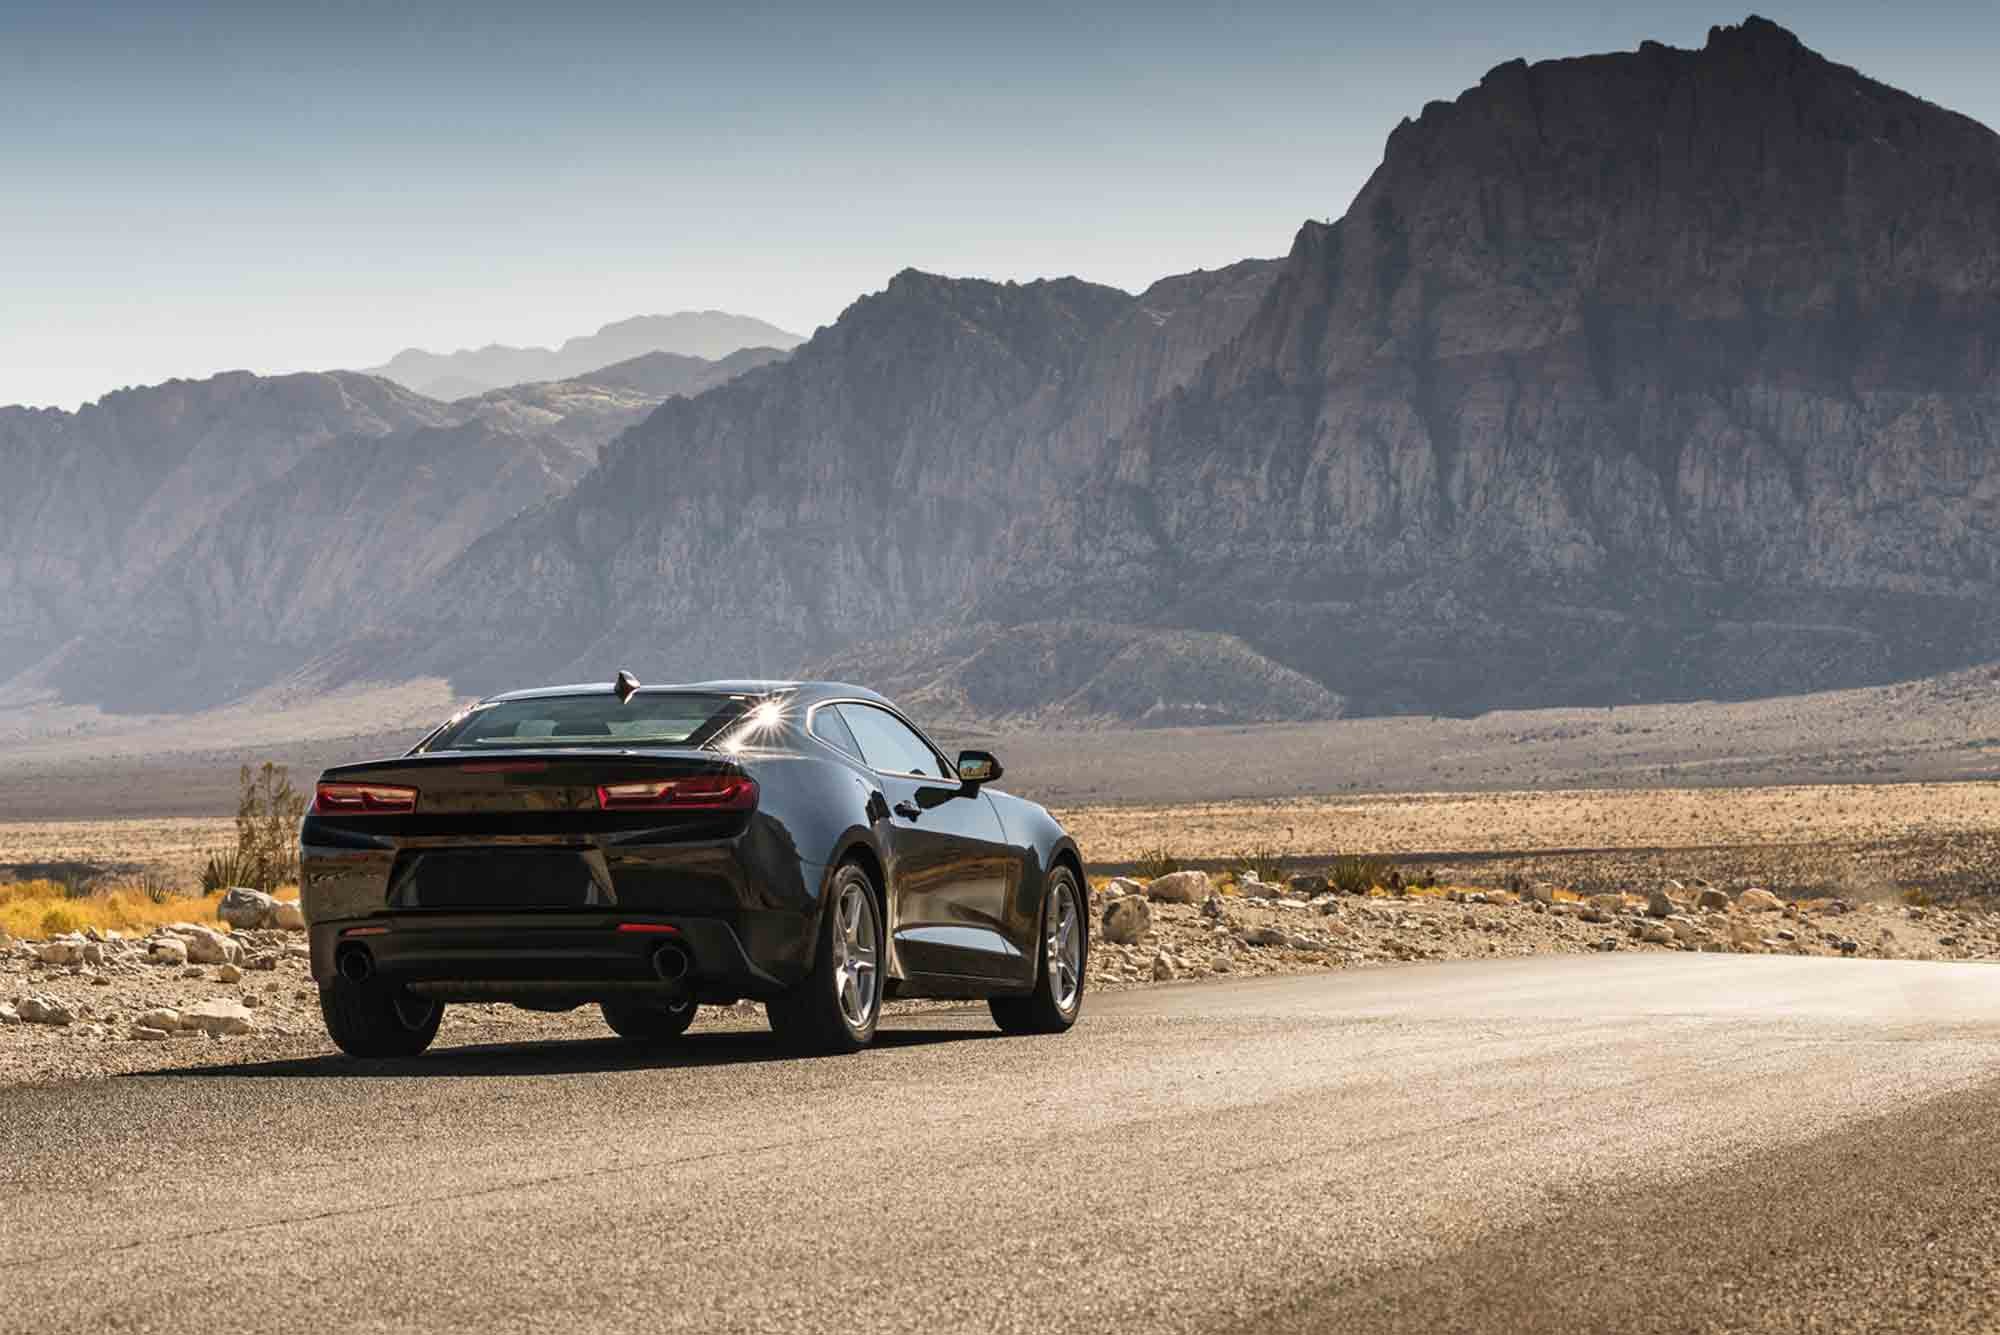 Utah desert with Camero purchased with used car loan